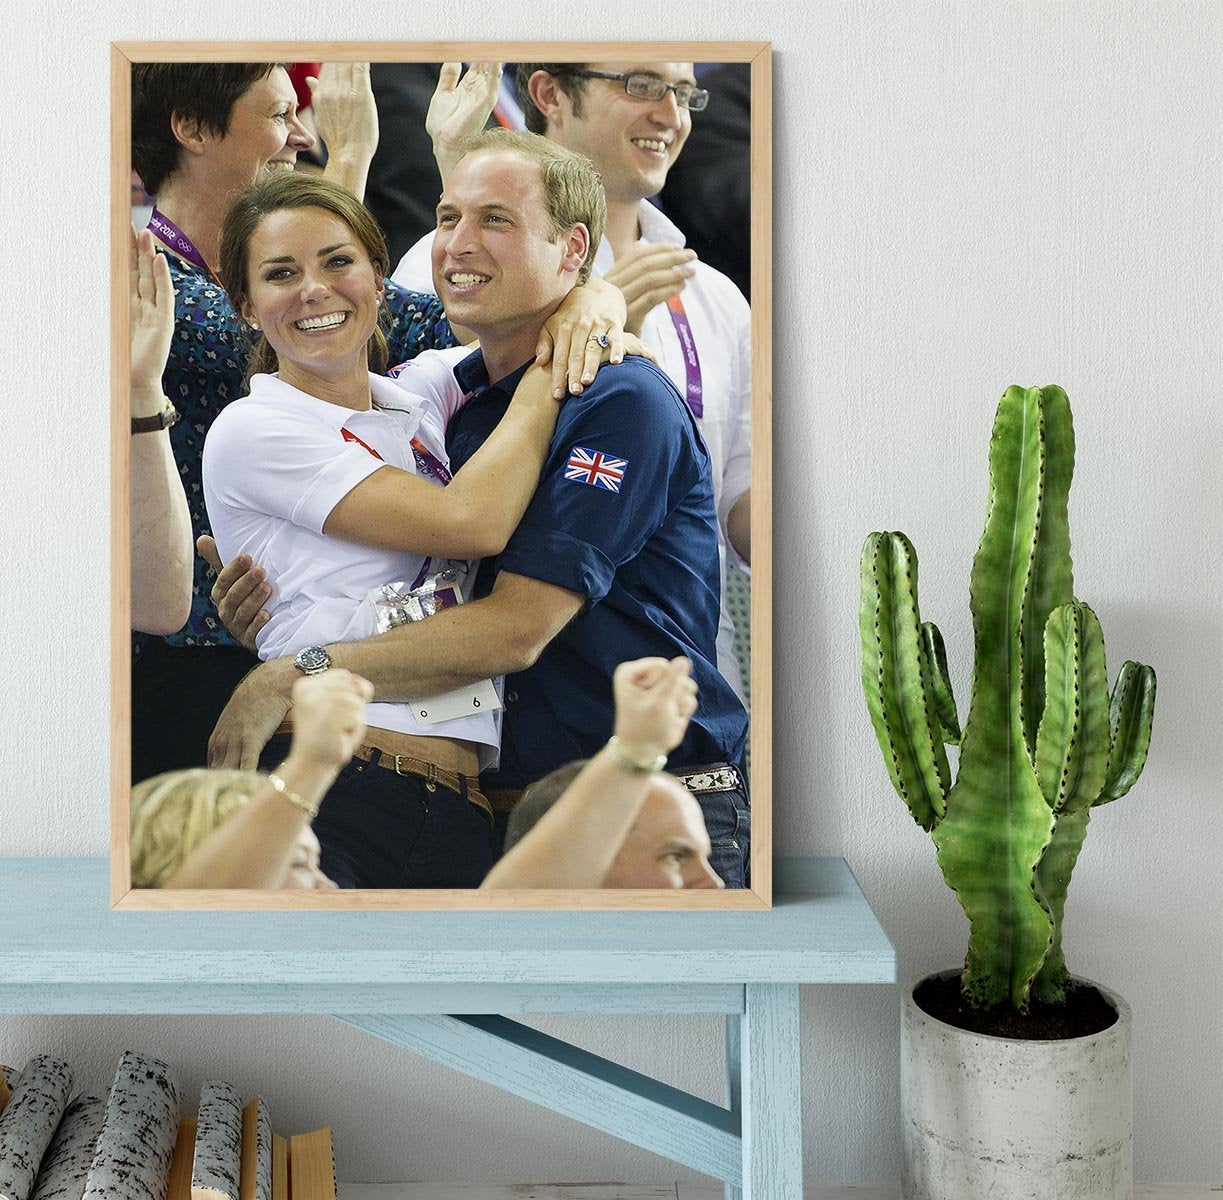 Prince William and Kate hugging at the 2012 Olympics Framed Print - Canvas Art Rocks - 4